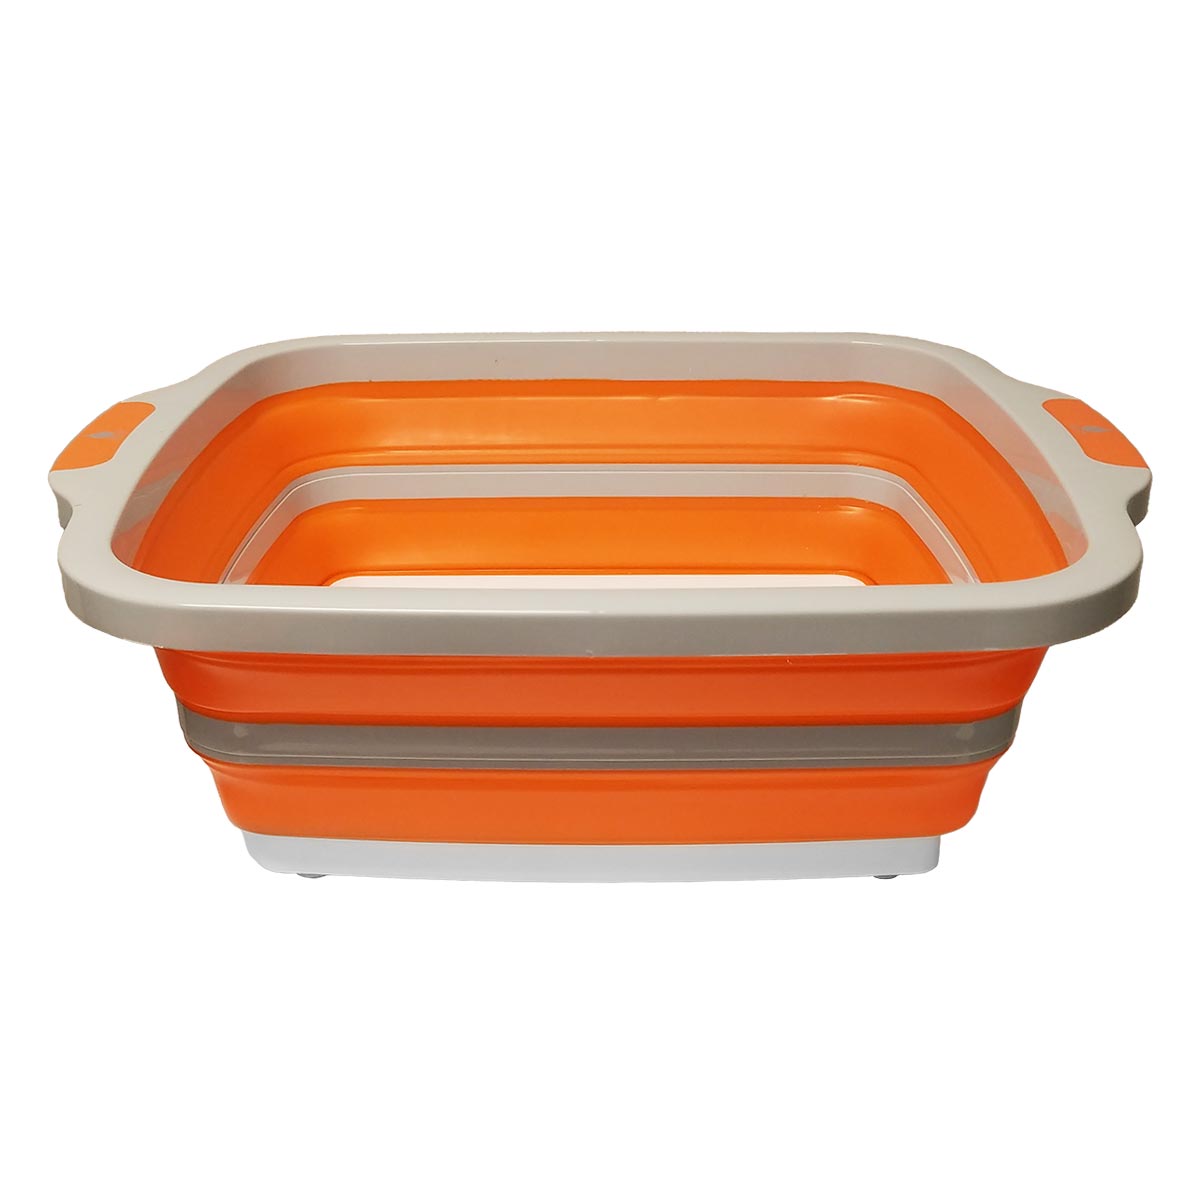 DRIPEZ BBQ Prep Tub with Lid and Built-in Cutting Board Foldable Design  TUBLD-12 